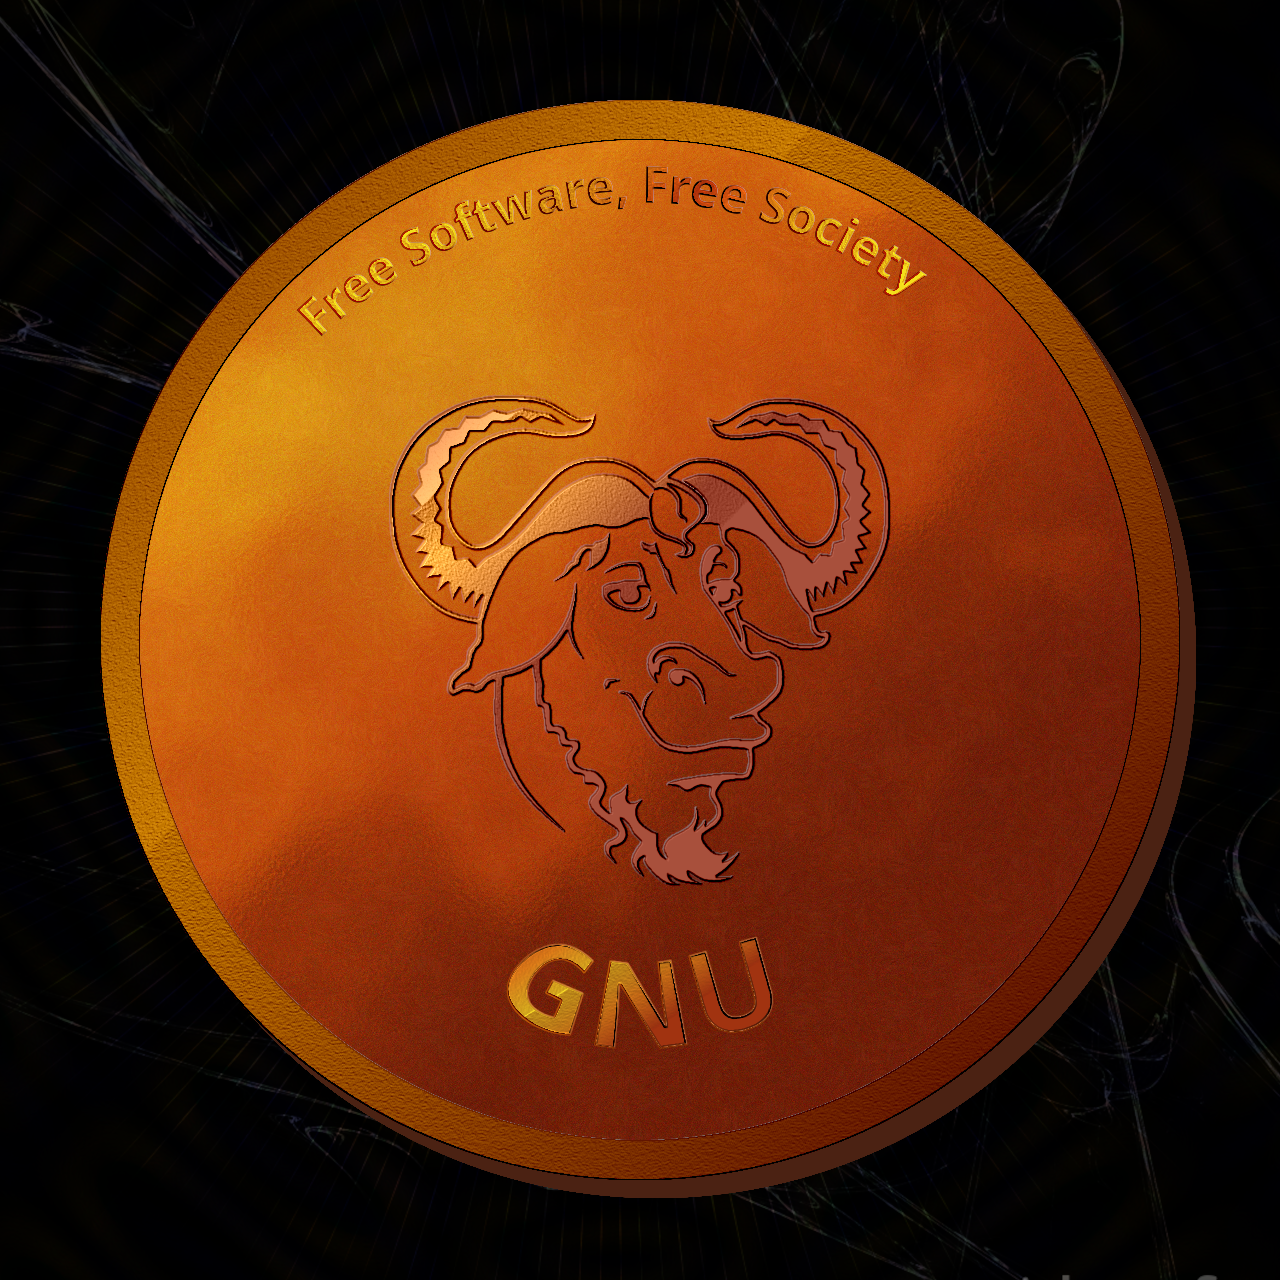 Image of a coin with a gnu on it and saying 'free software; free society'